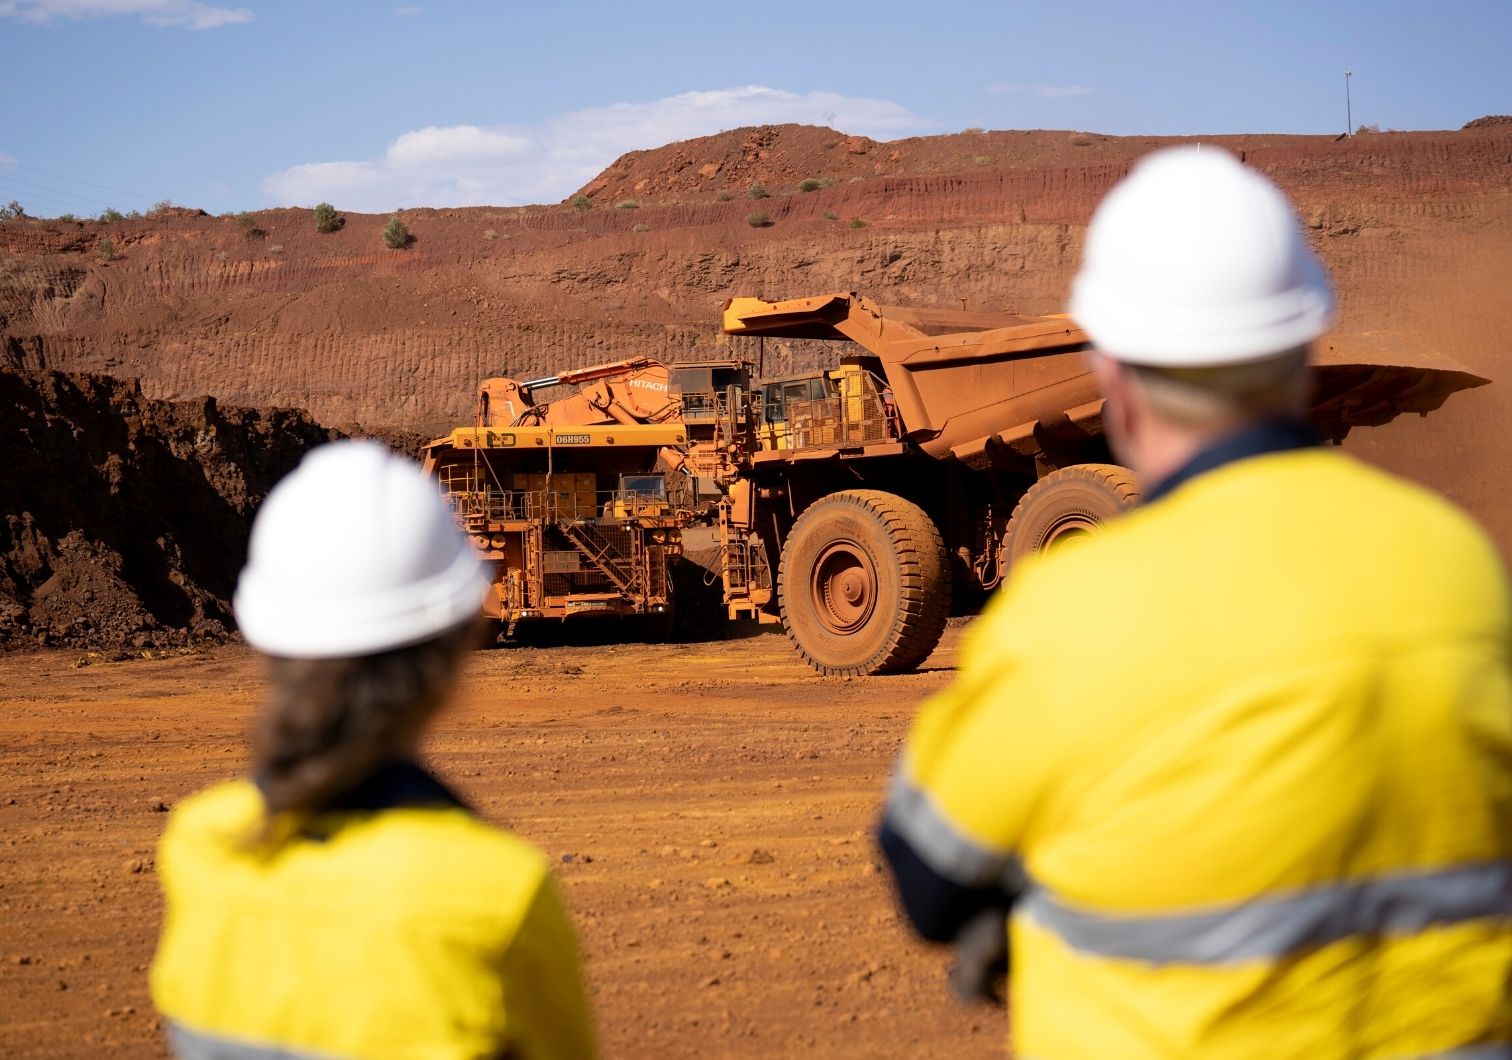 Mining Safety - Two staff watching mining equipment operate